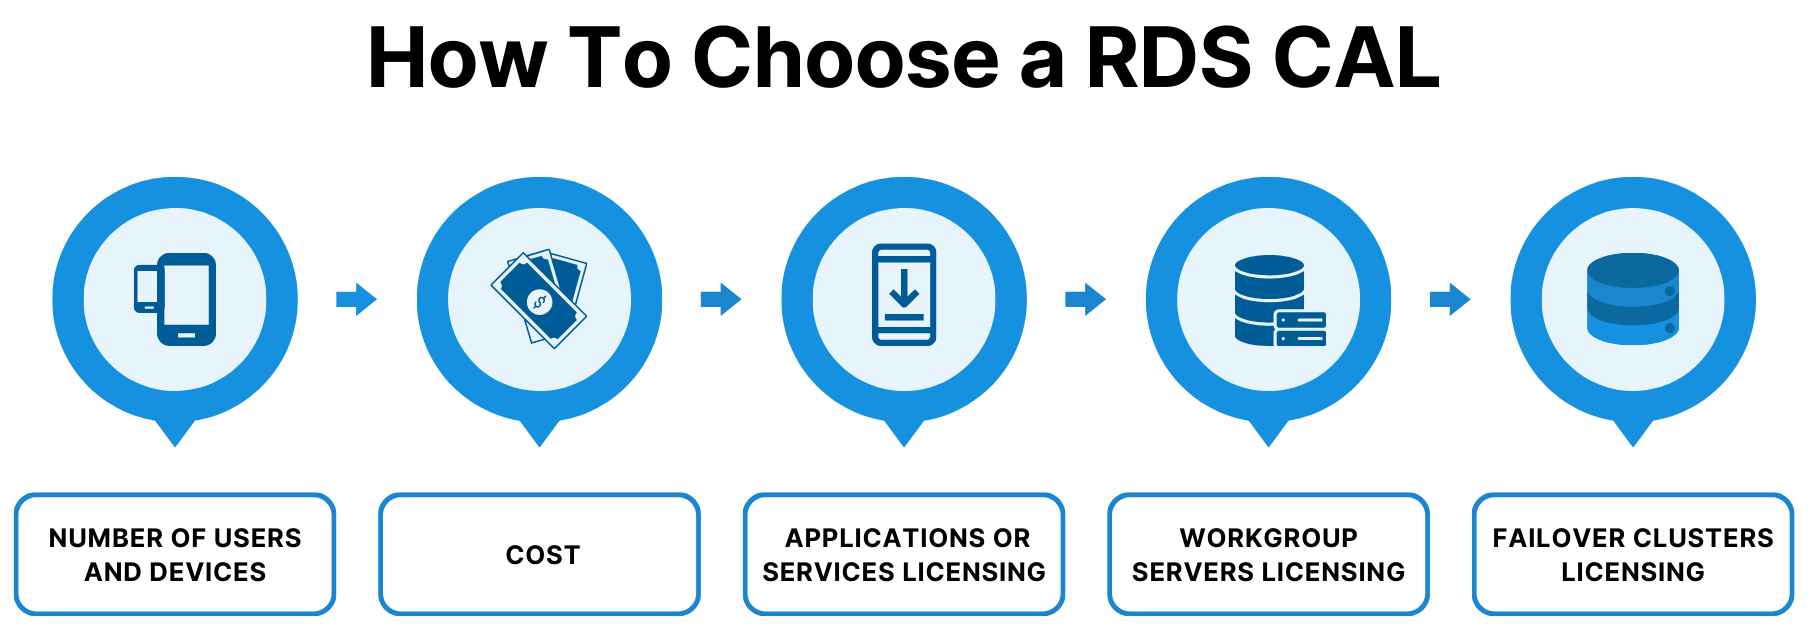 how to choose a rdp license type